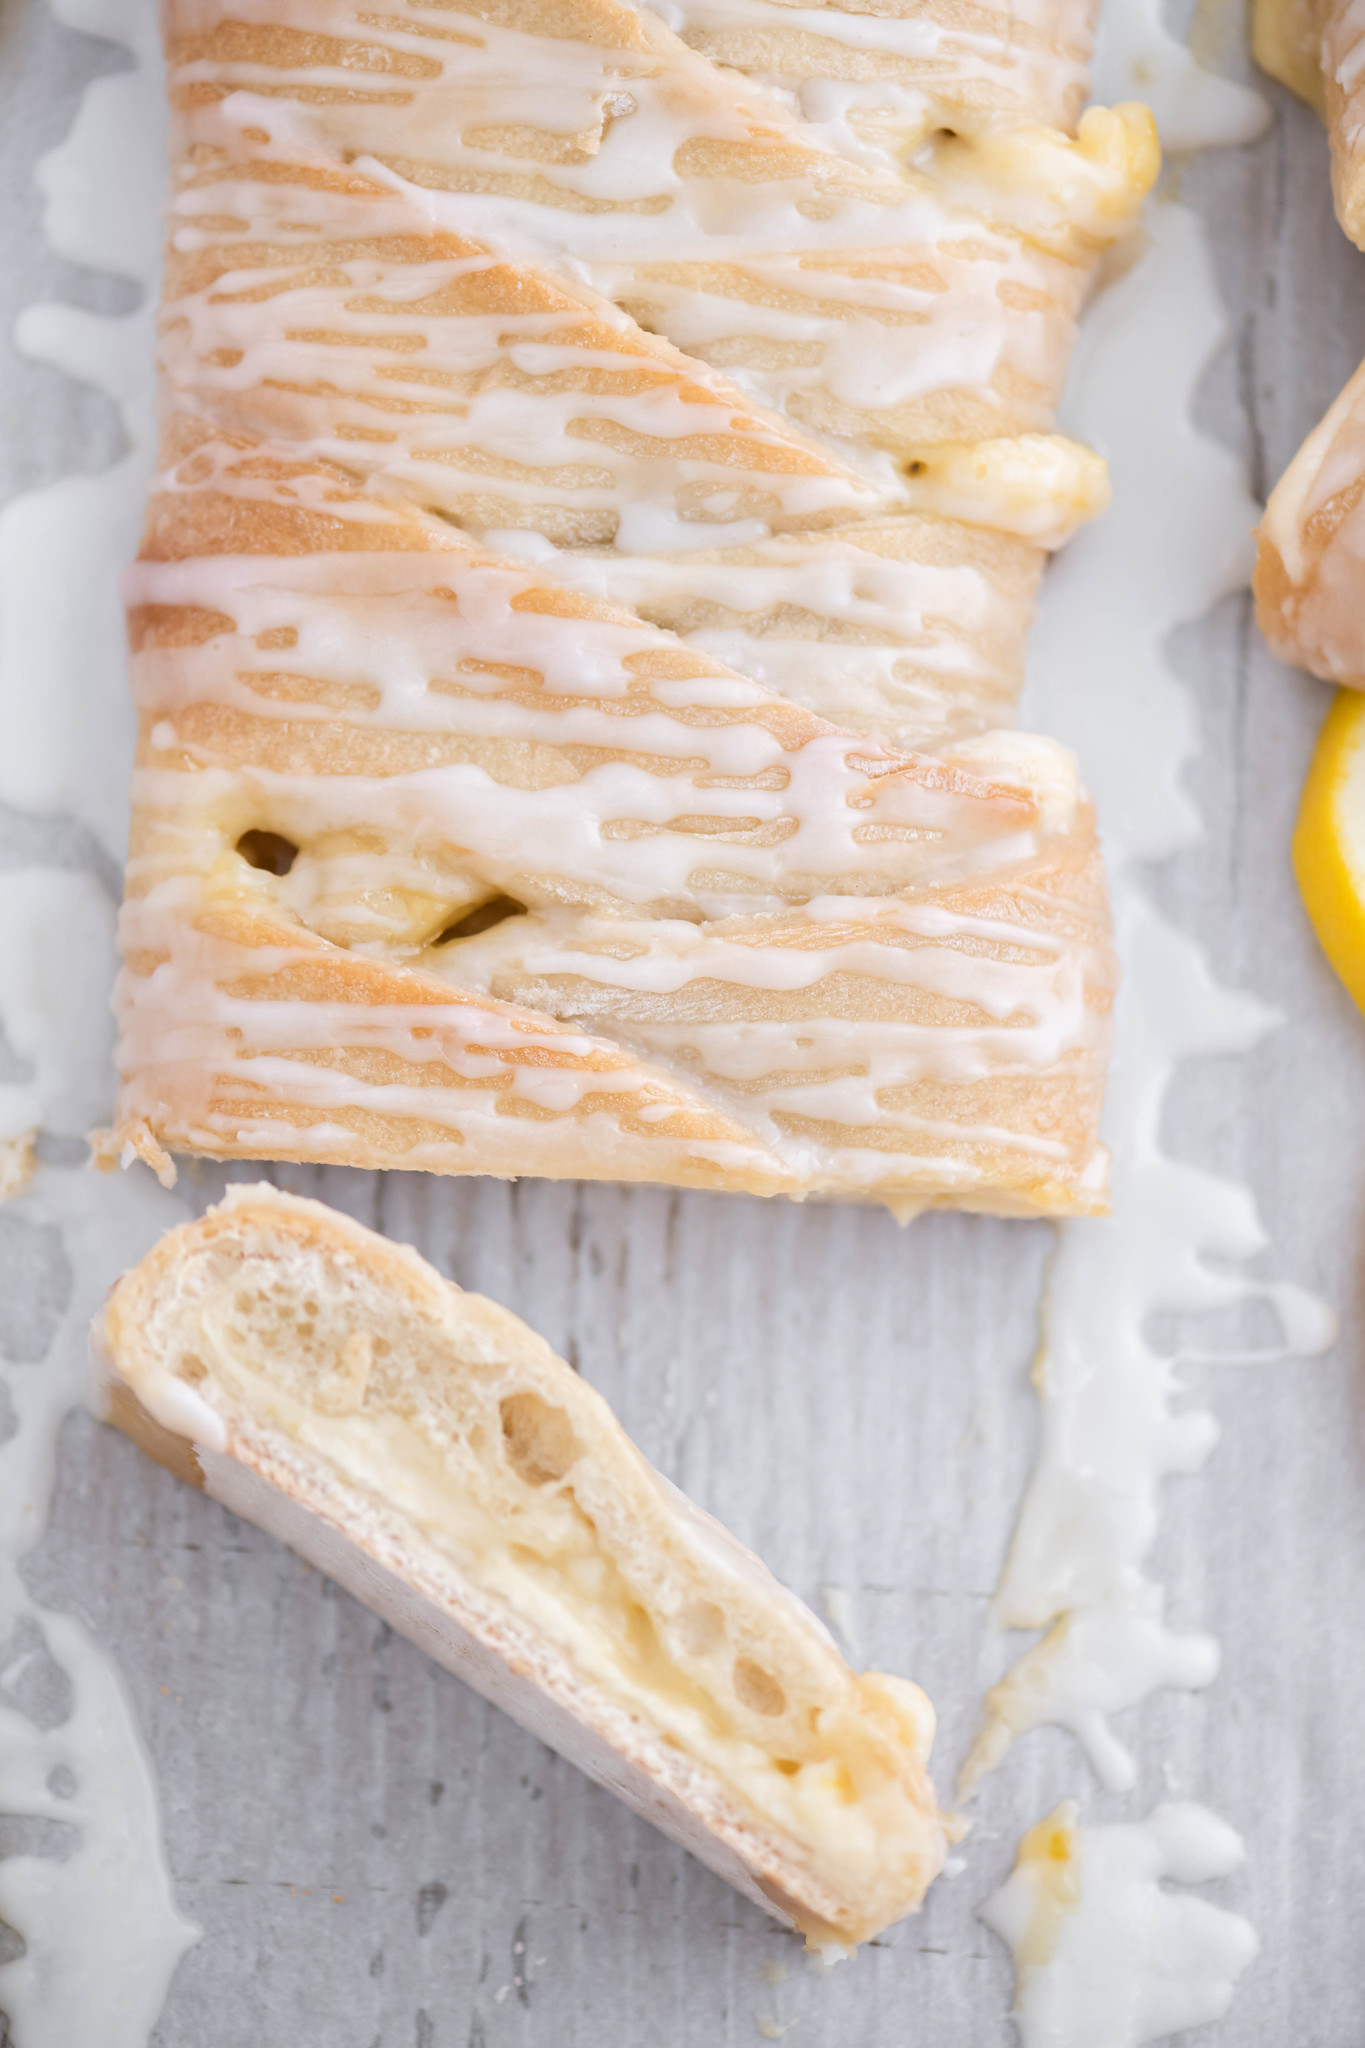 This Lemon Cream Cheese Braid is Easter brunch perfection. Start with Rhodes sweet dough and a few simple ingredients to make this holiday stunner.